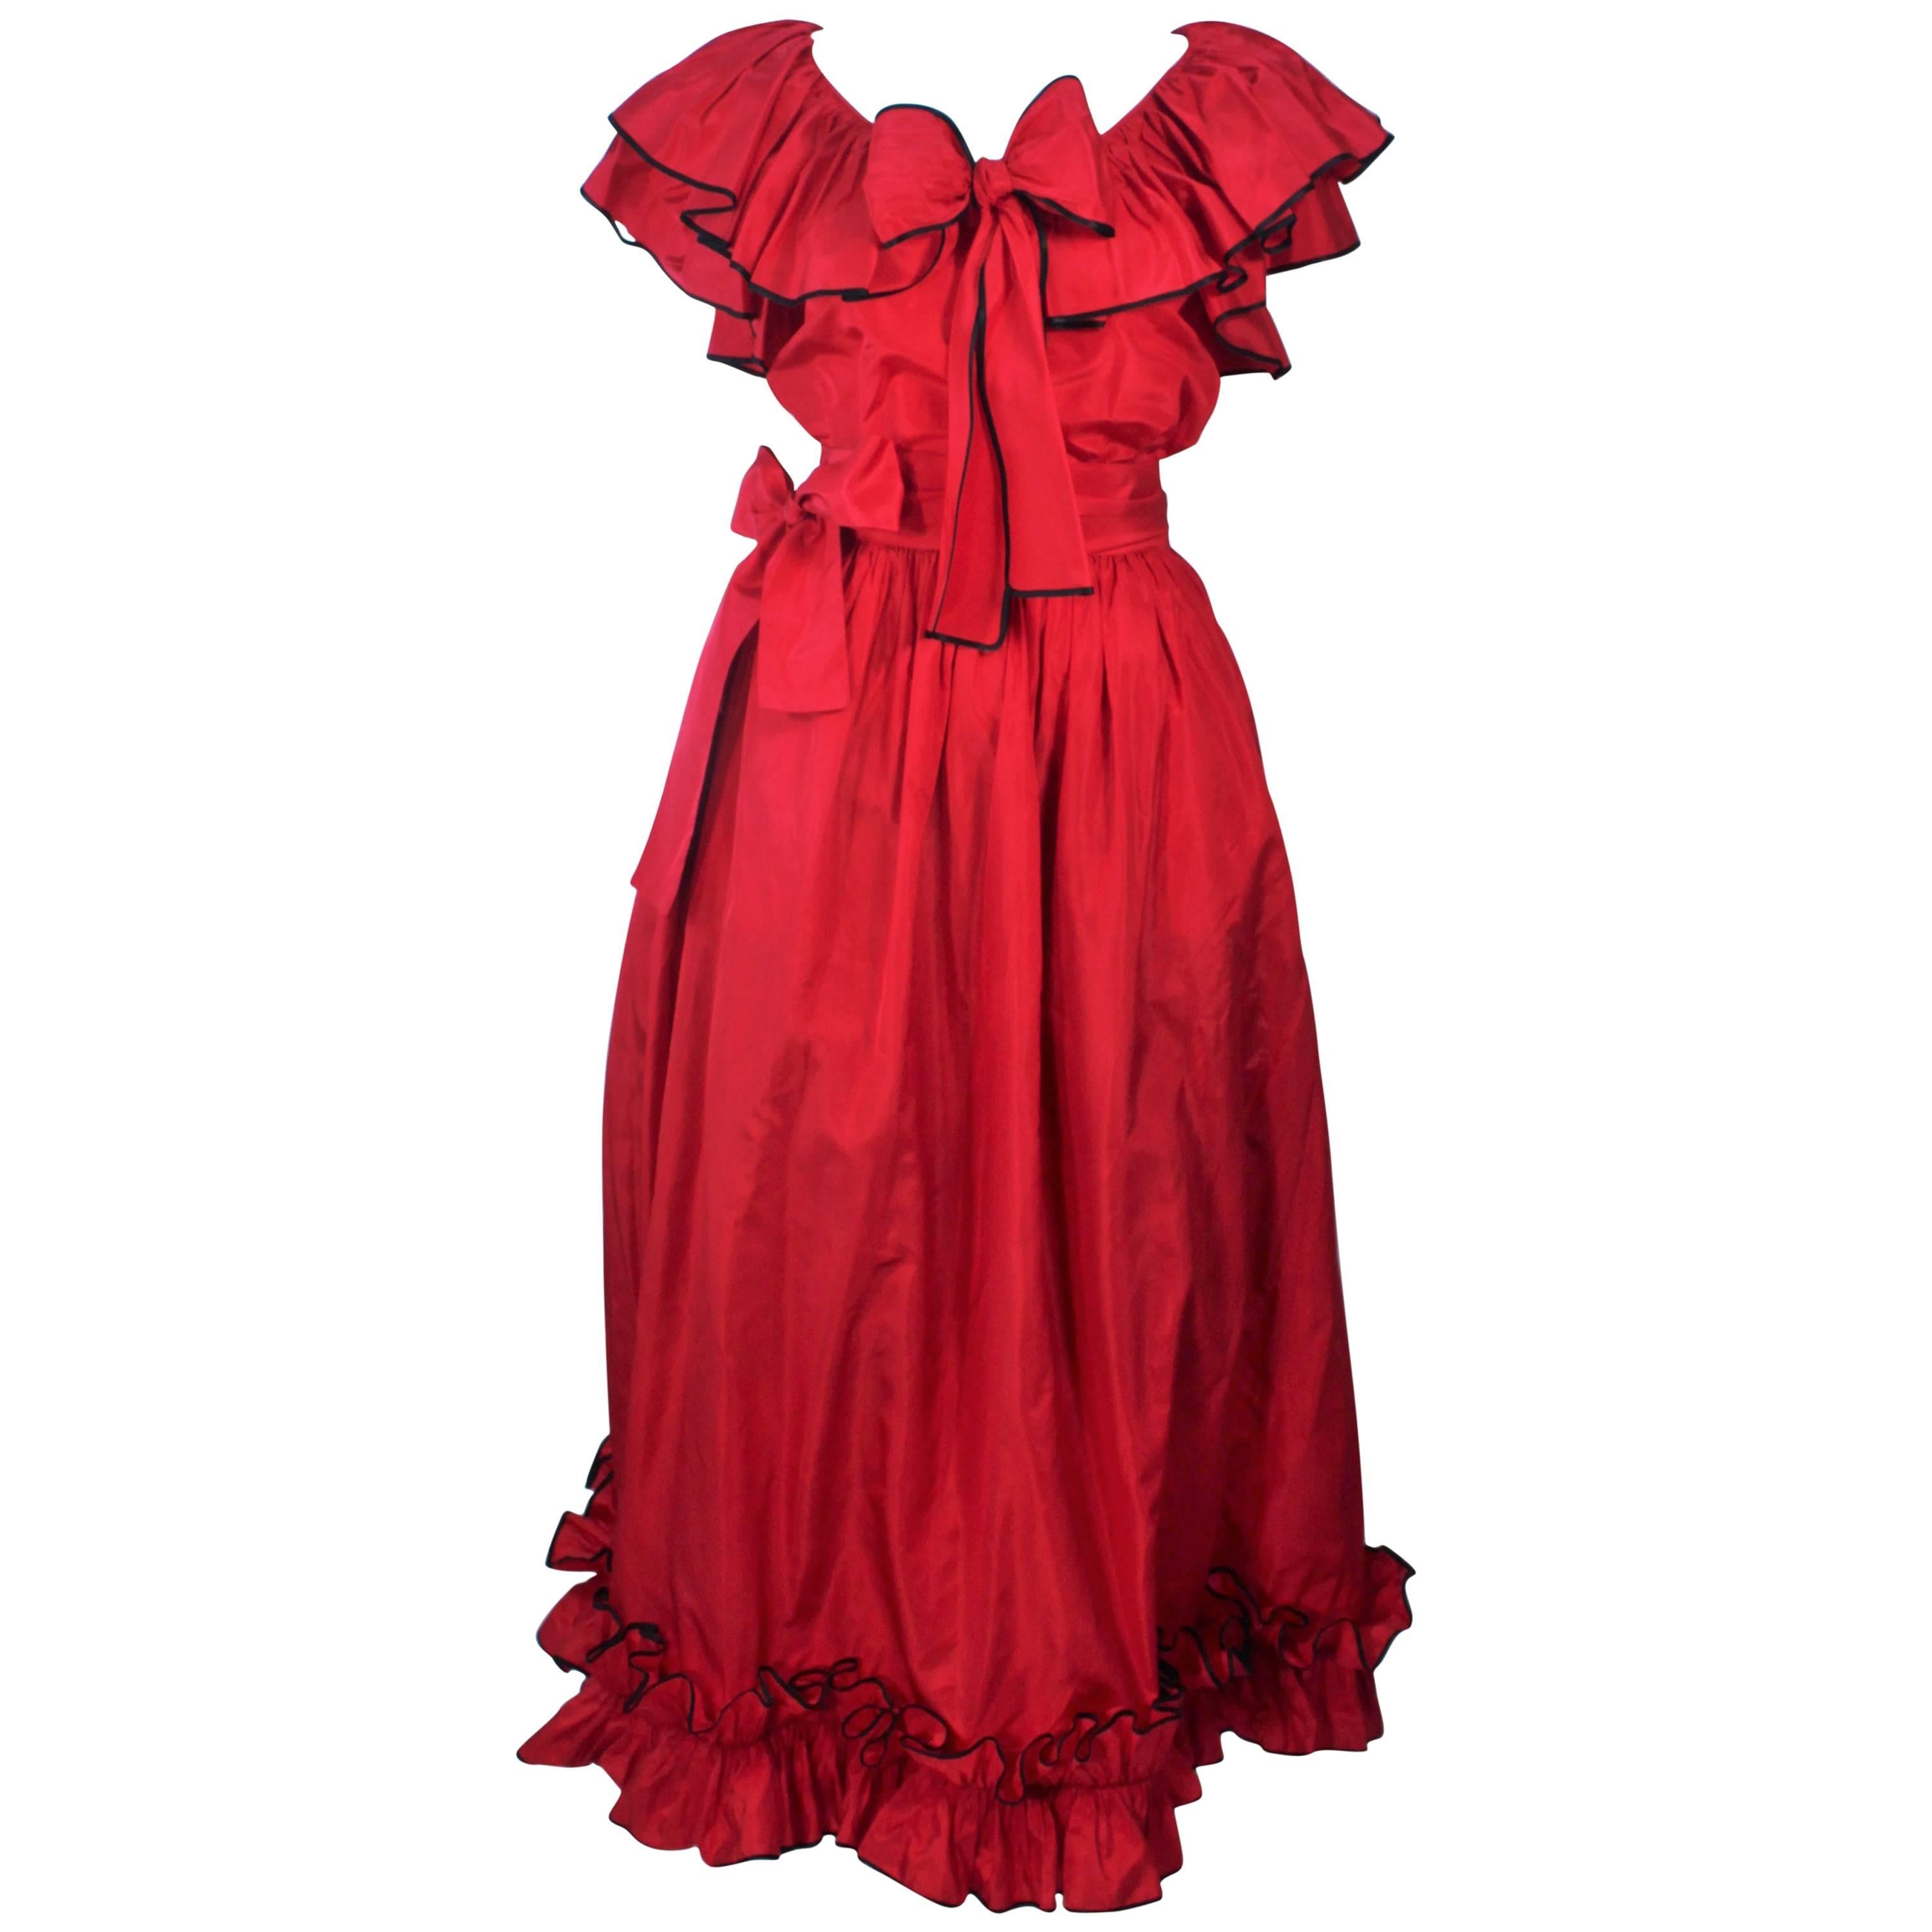 YVES SAINT LAURENT 1970's Red Satin Ruffled Ensemble with Black Trim Size 40 For Sale